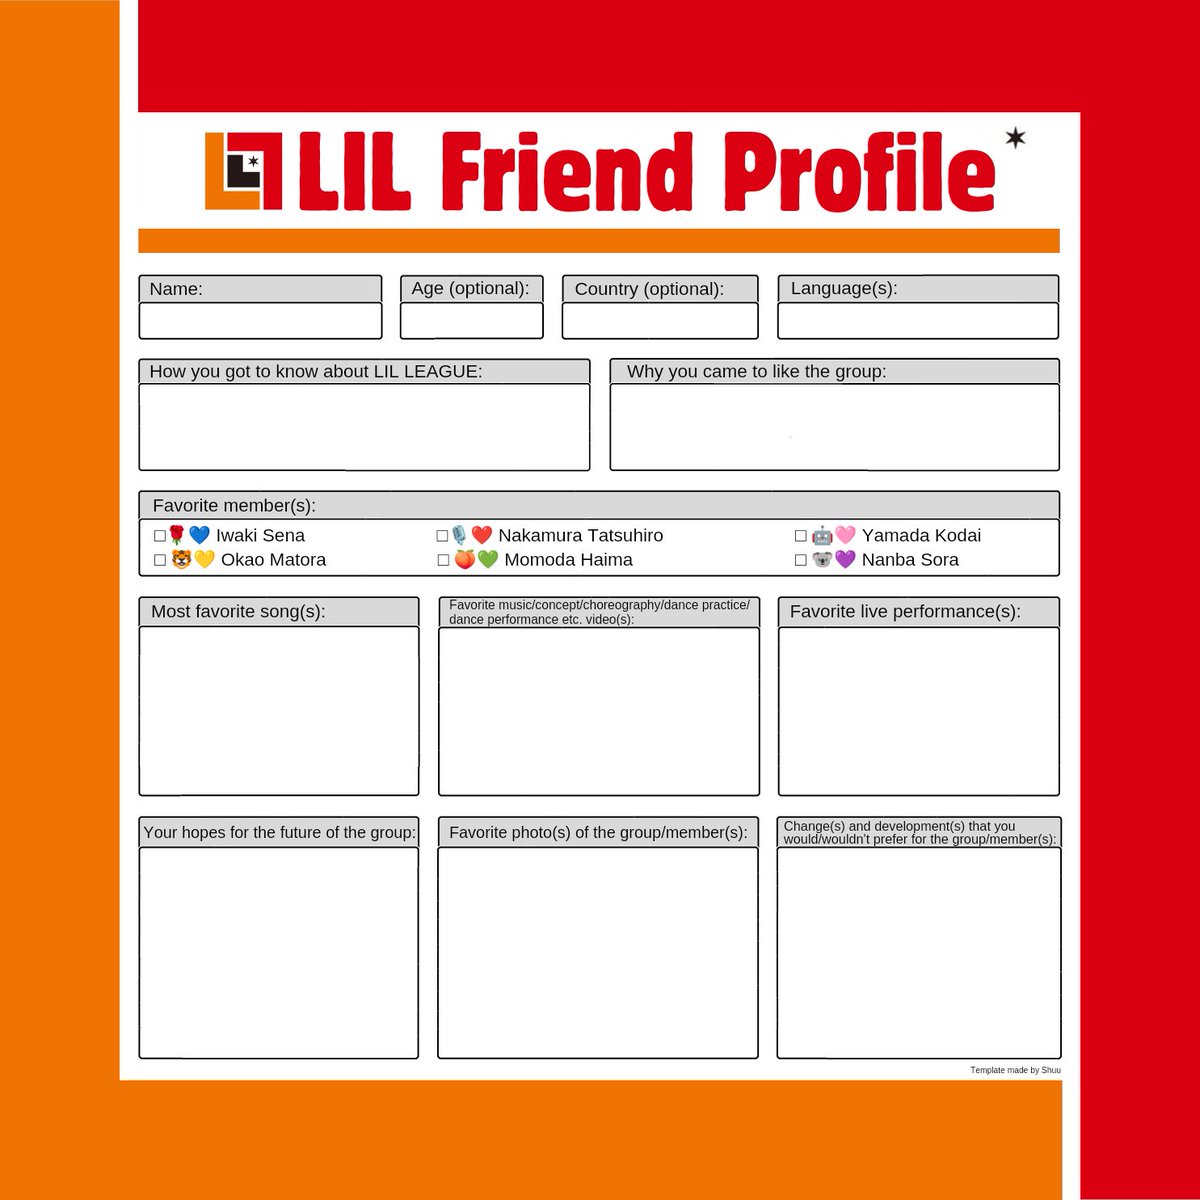 To #LILFriends
I've seen this kind of templates for various media including LIL LEAGUE. As I'm picky about wordings, I carefully made one of my own.
Let's unite as fans & reach our love to the group with #LILFriendProfile posts. Retweets are appreciated. 🧡
#LILLEAGUE #リルリーグ